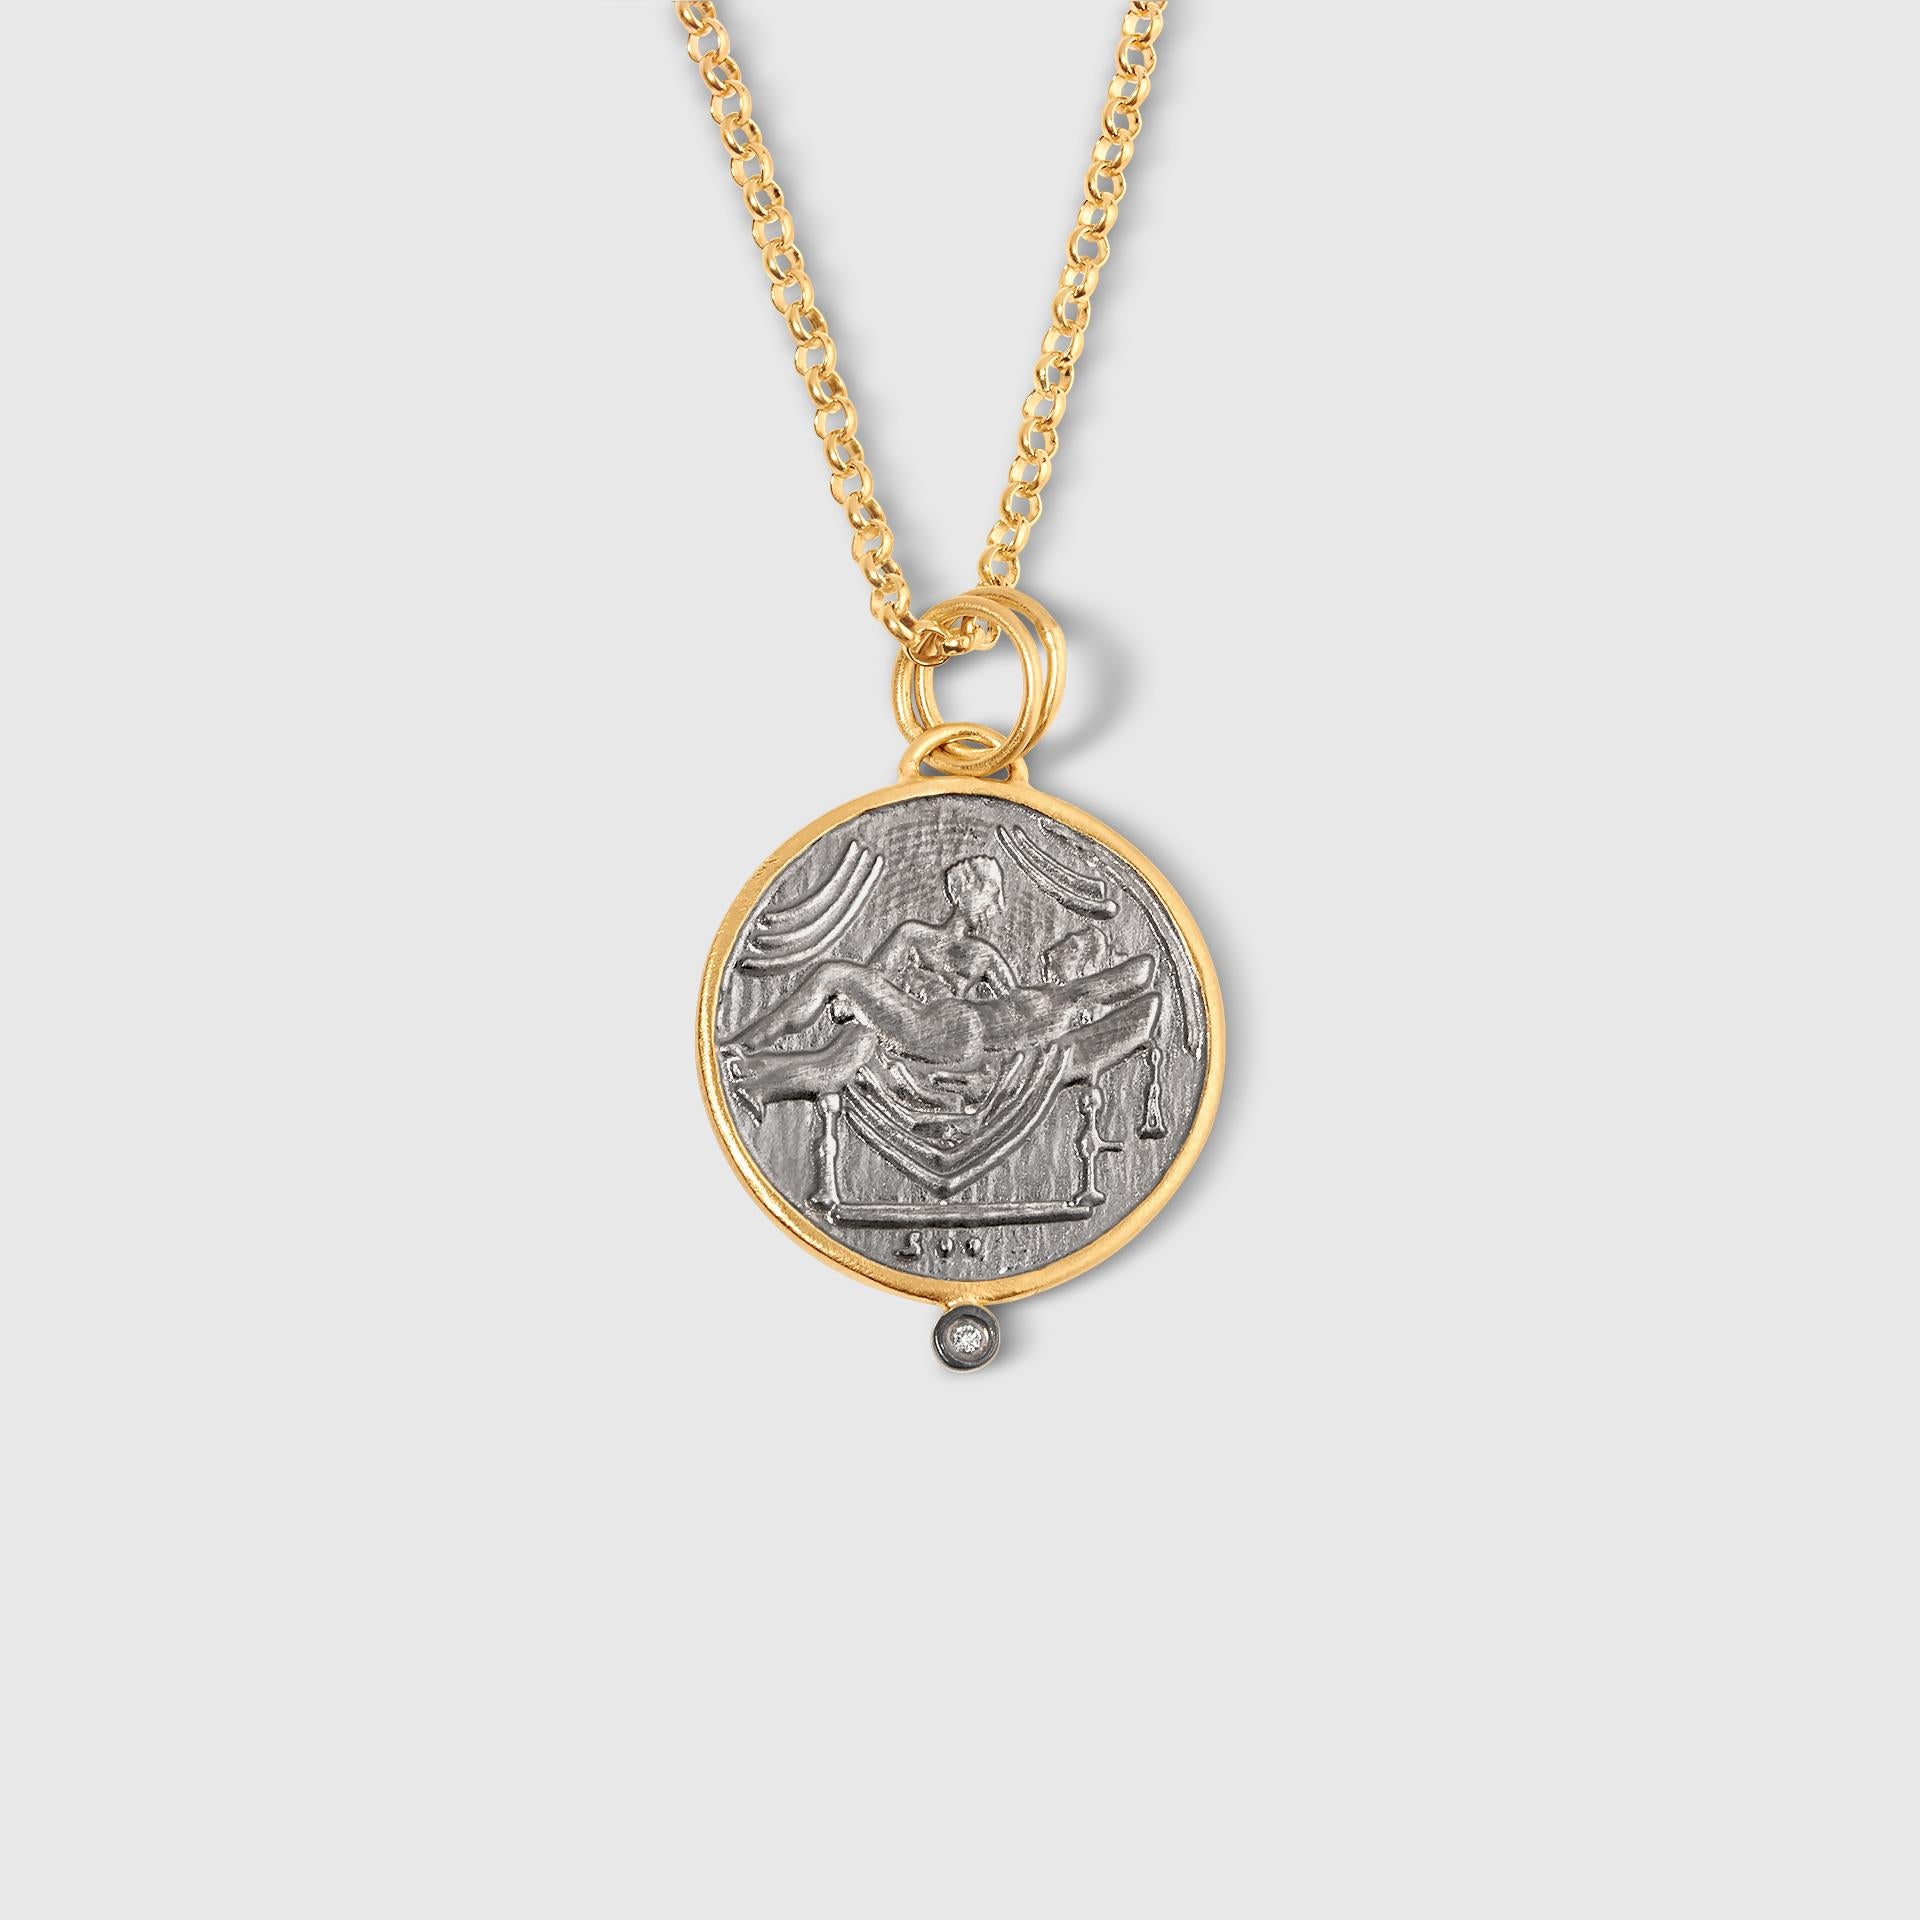 XII Pompei Coin with Diamonds, 24kt Yellow Gold and Silver, Size Large, Diamonds: 0.02ct, Colour: H Clarity: VS2, Comes with 18